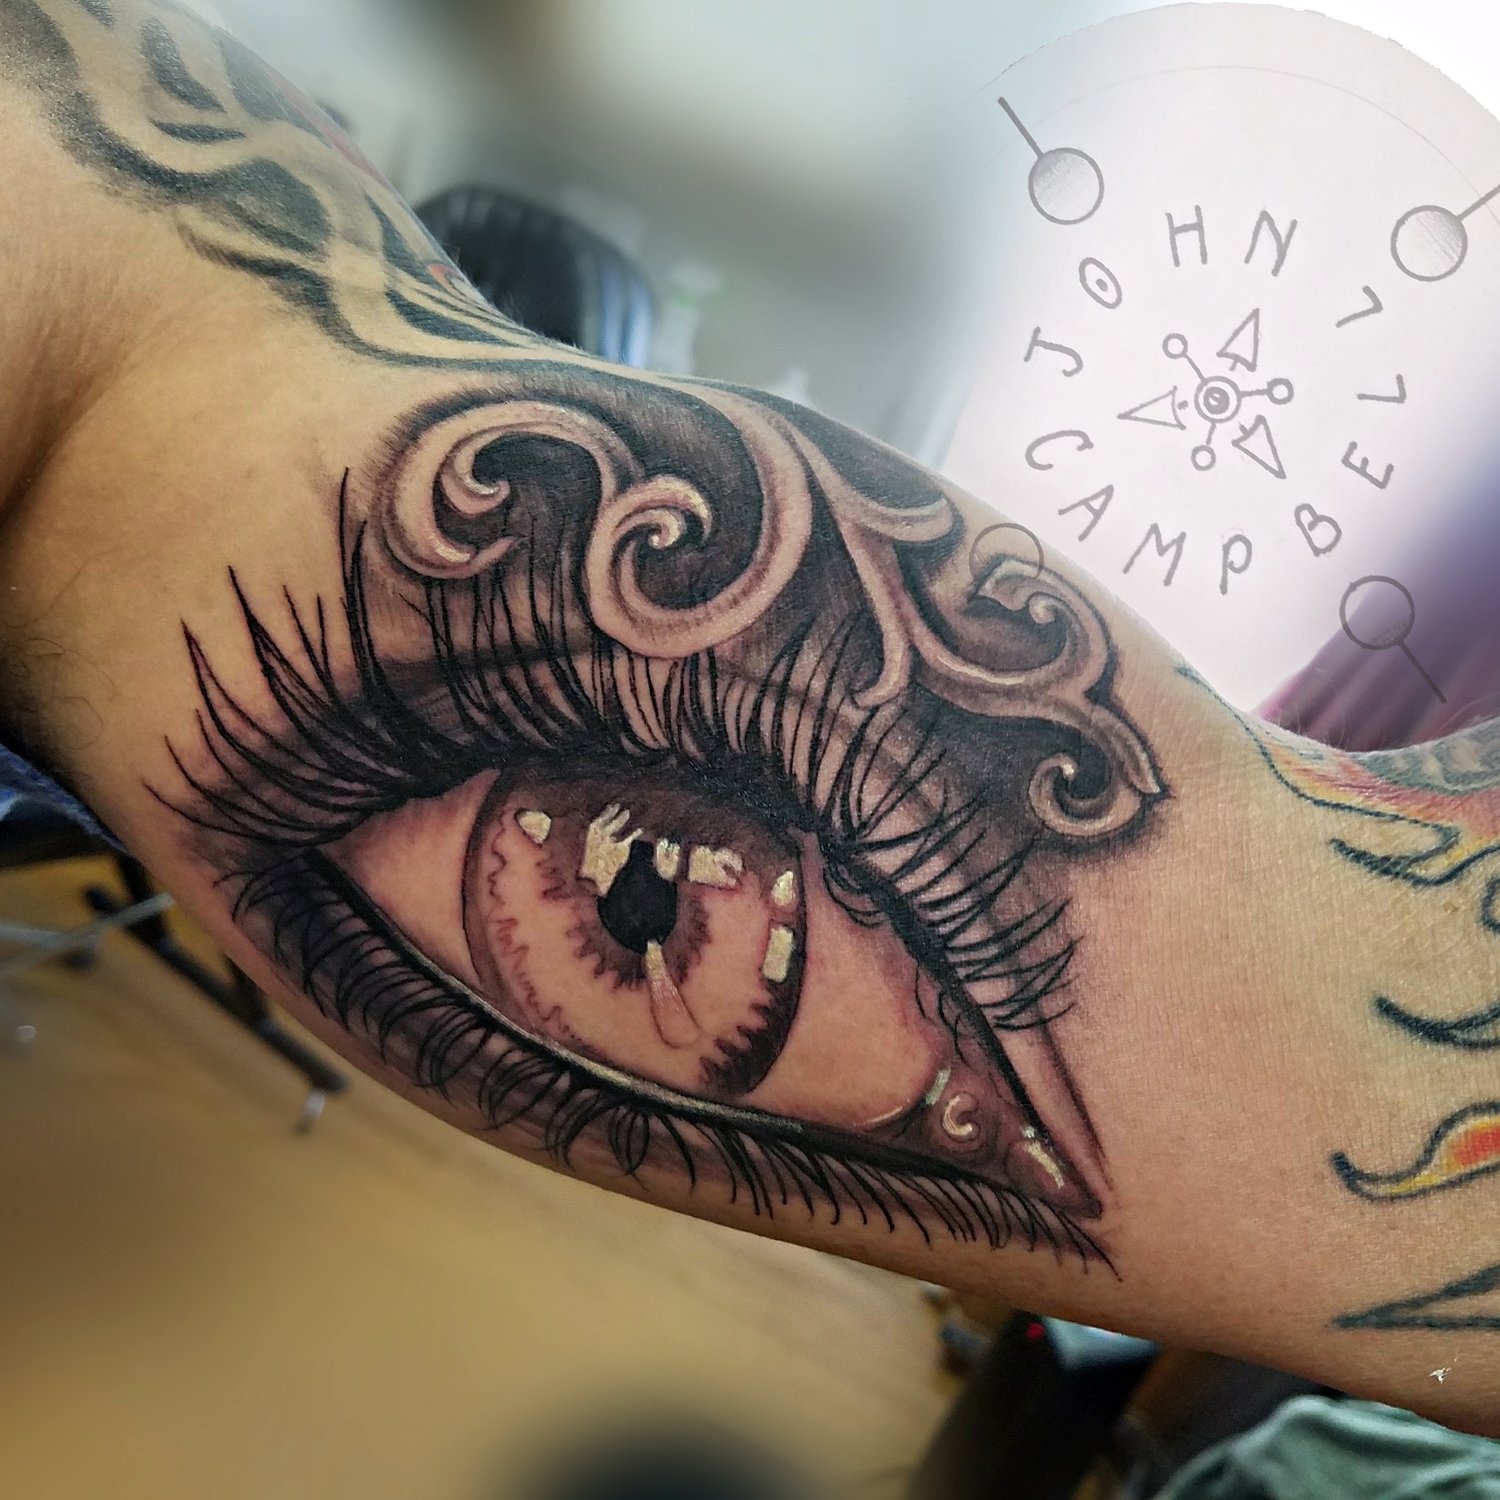 Color Tattoo of an Eye by Tattoo Artist John Campbell for Sacred Mandala Studio in Durham, NC.